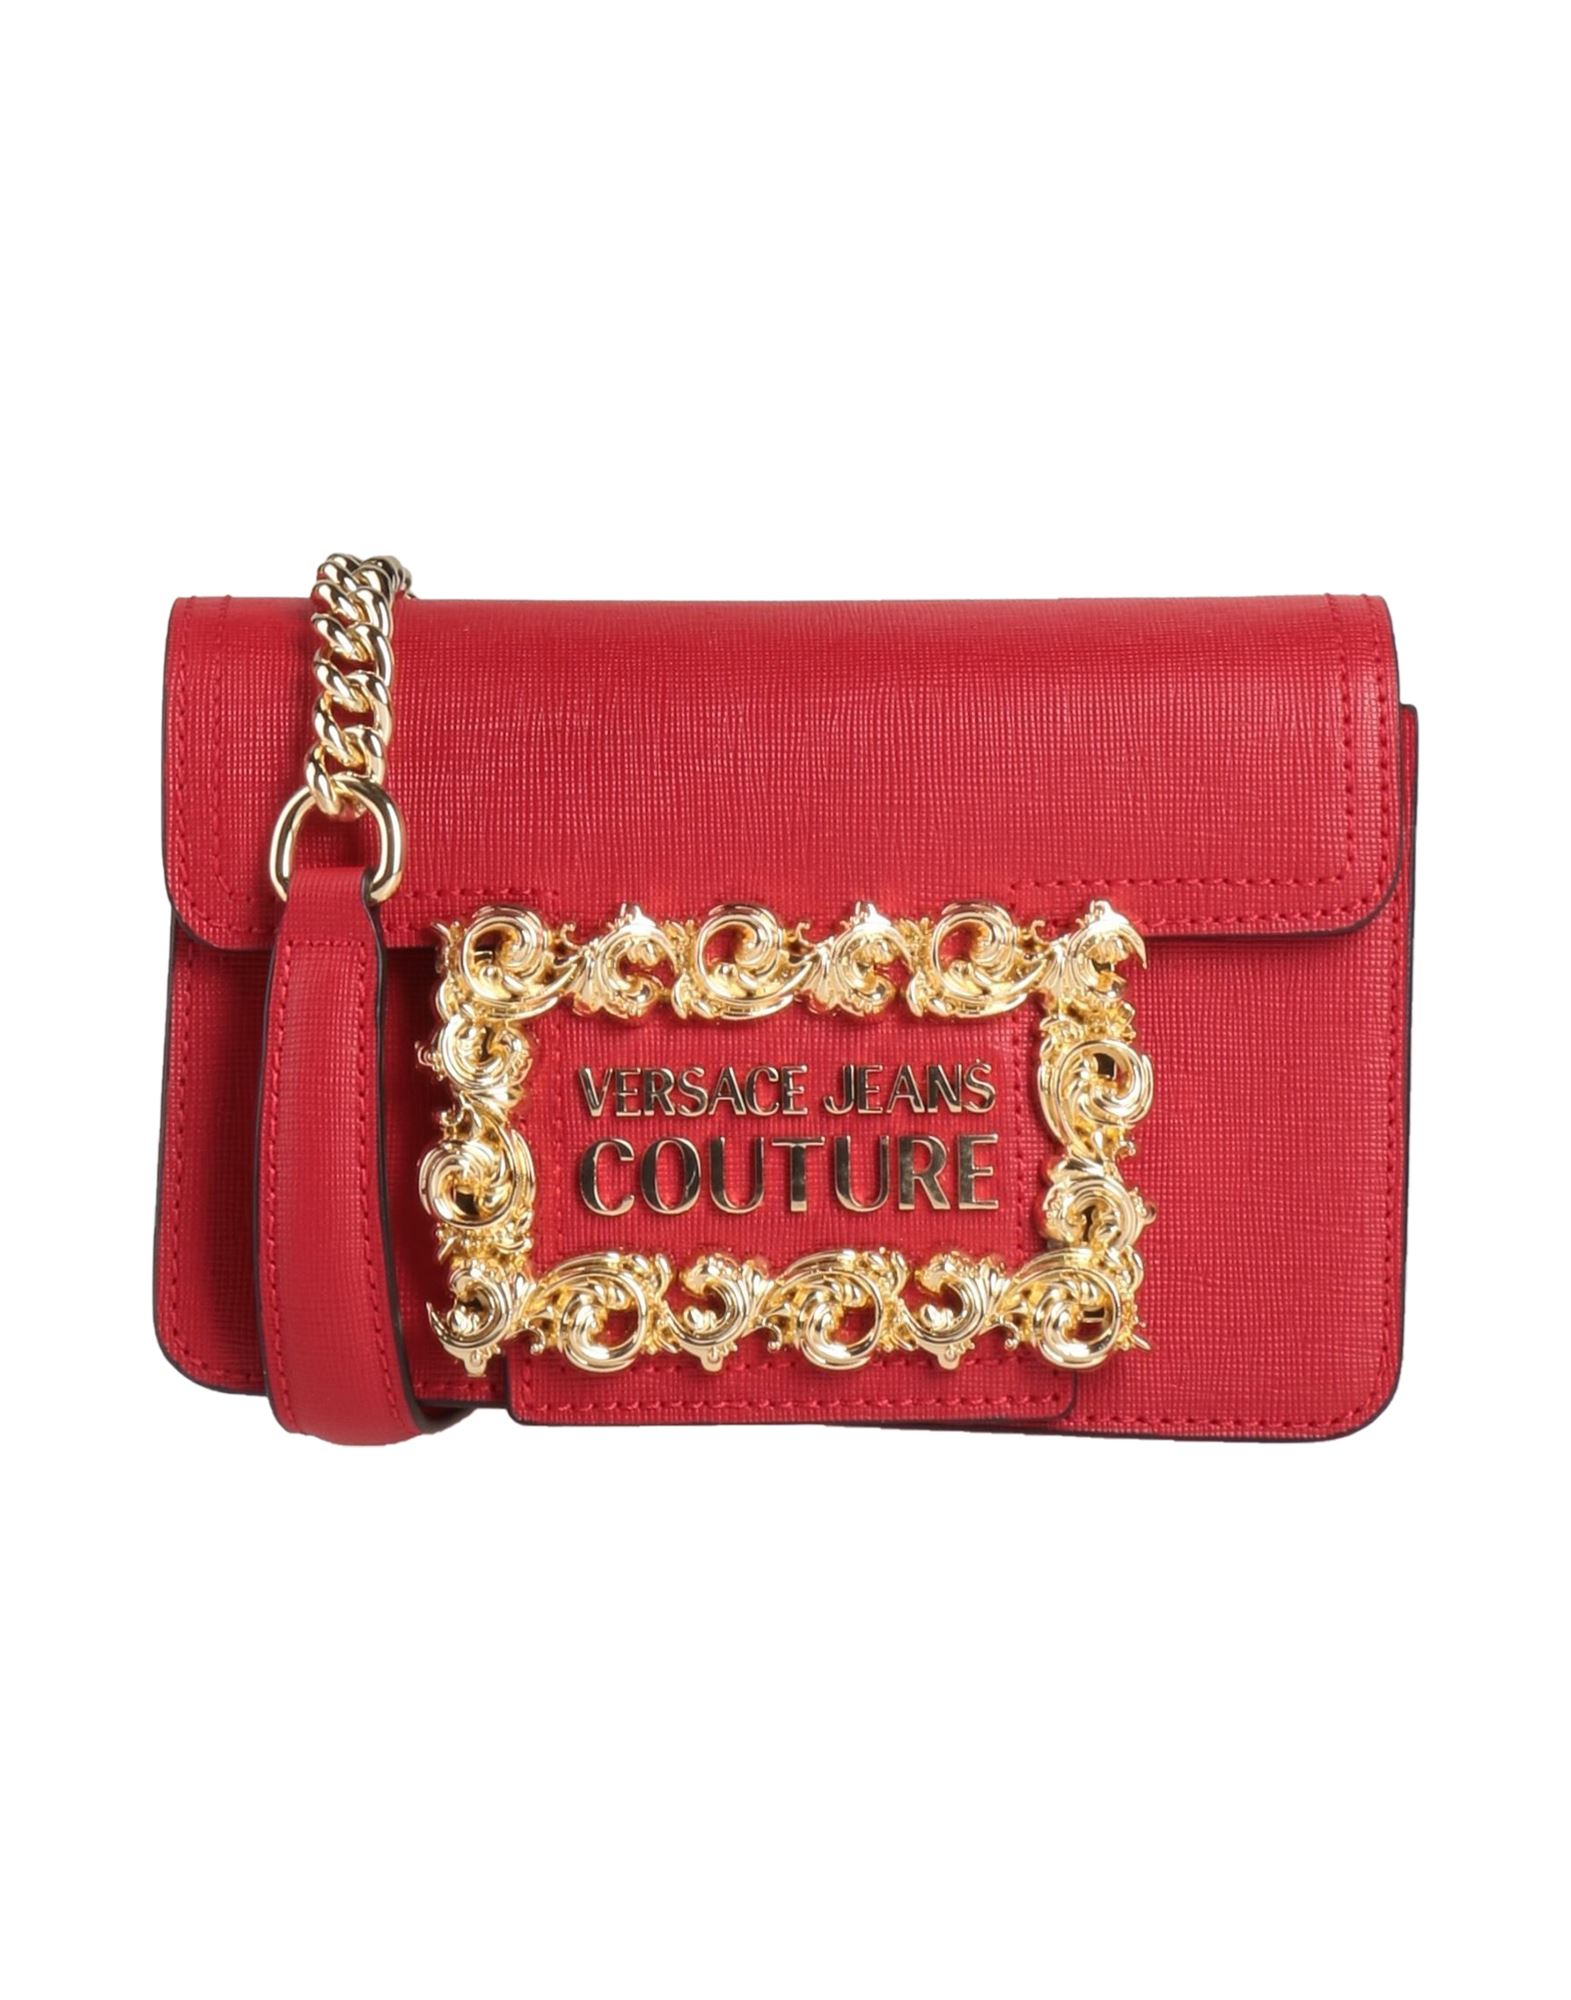 Versace Jeans Couture Handbags In Red